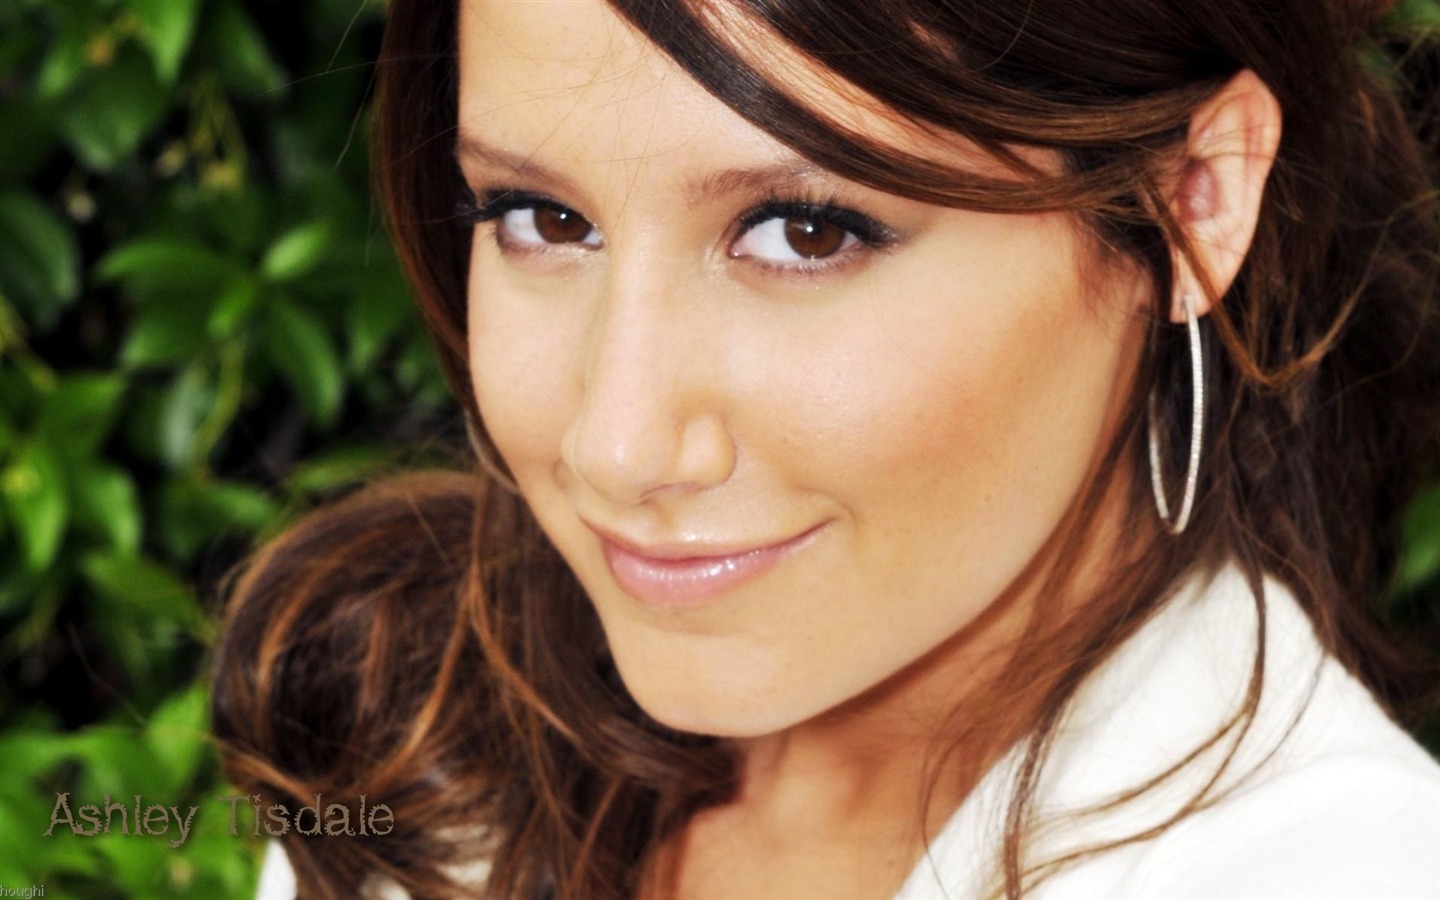 Ashley Tisdale #042 - 1440x900 Wallpapers Pictures Photos Images